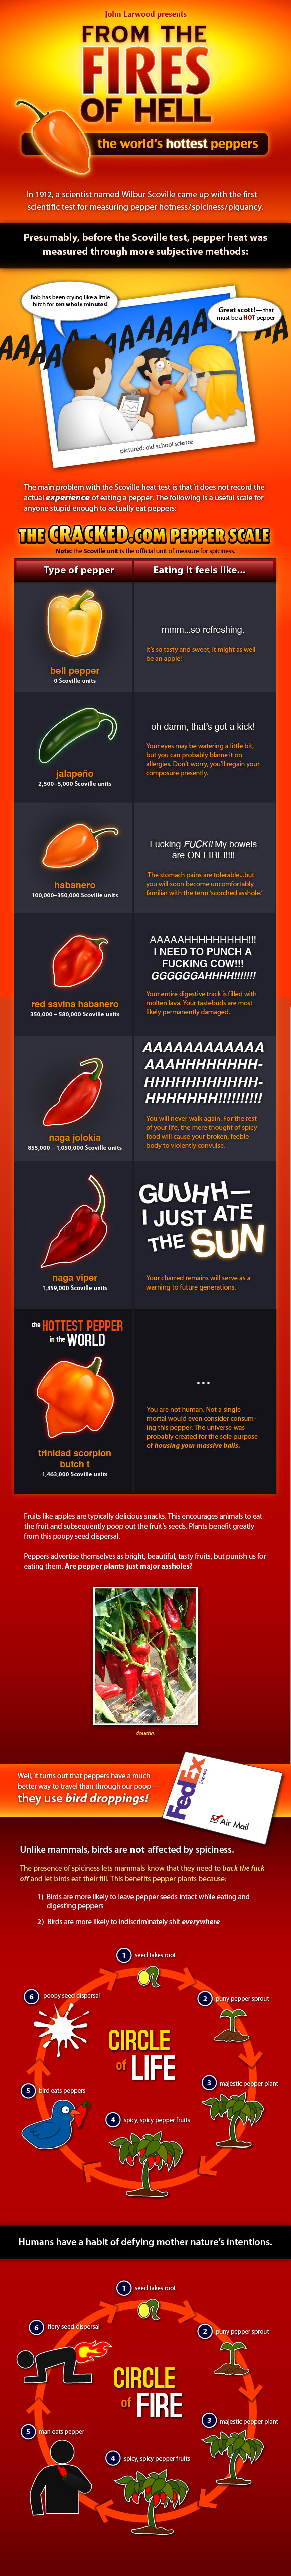 Hot Peppers. thats hot. aim Lamond presents FROM THE the world' s hottest peppers In 1912. a scientist named Wilbur Scoville came up with the hast for measuring